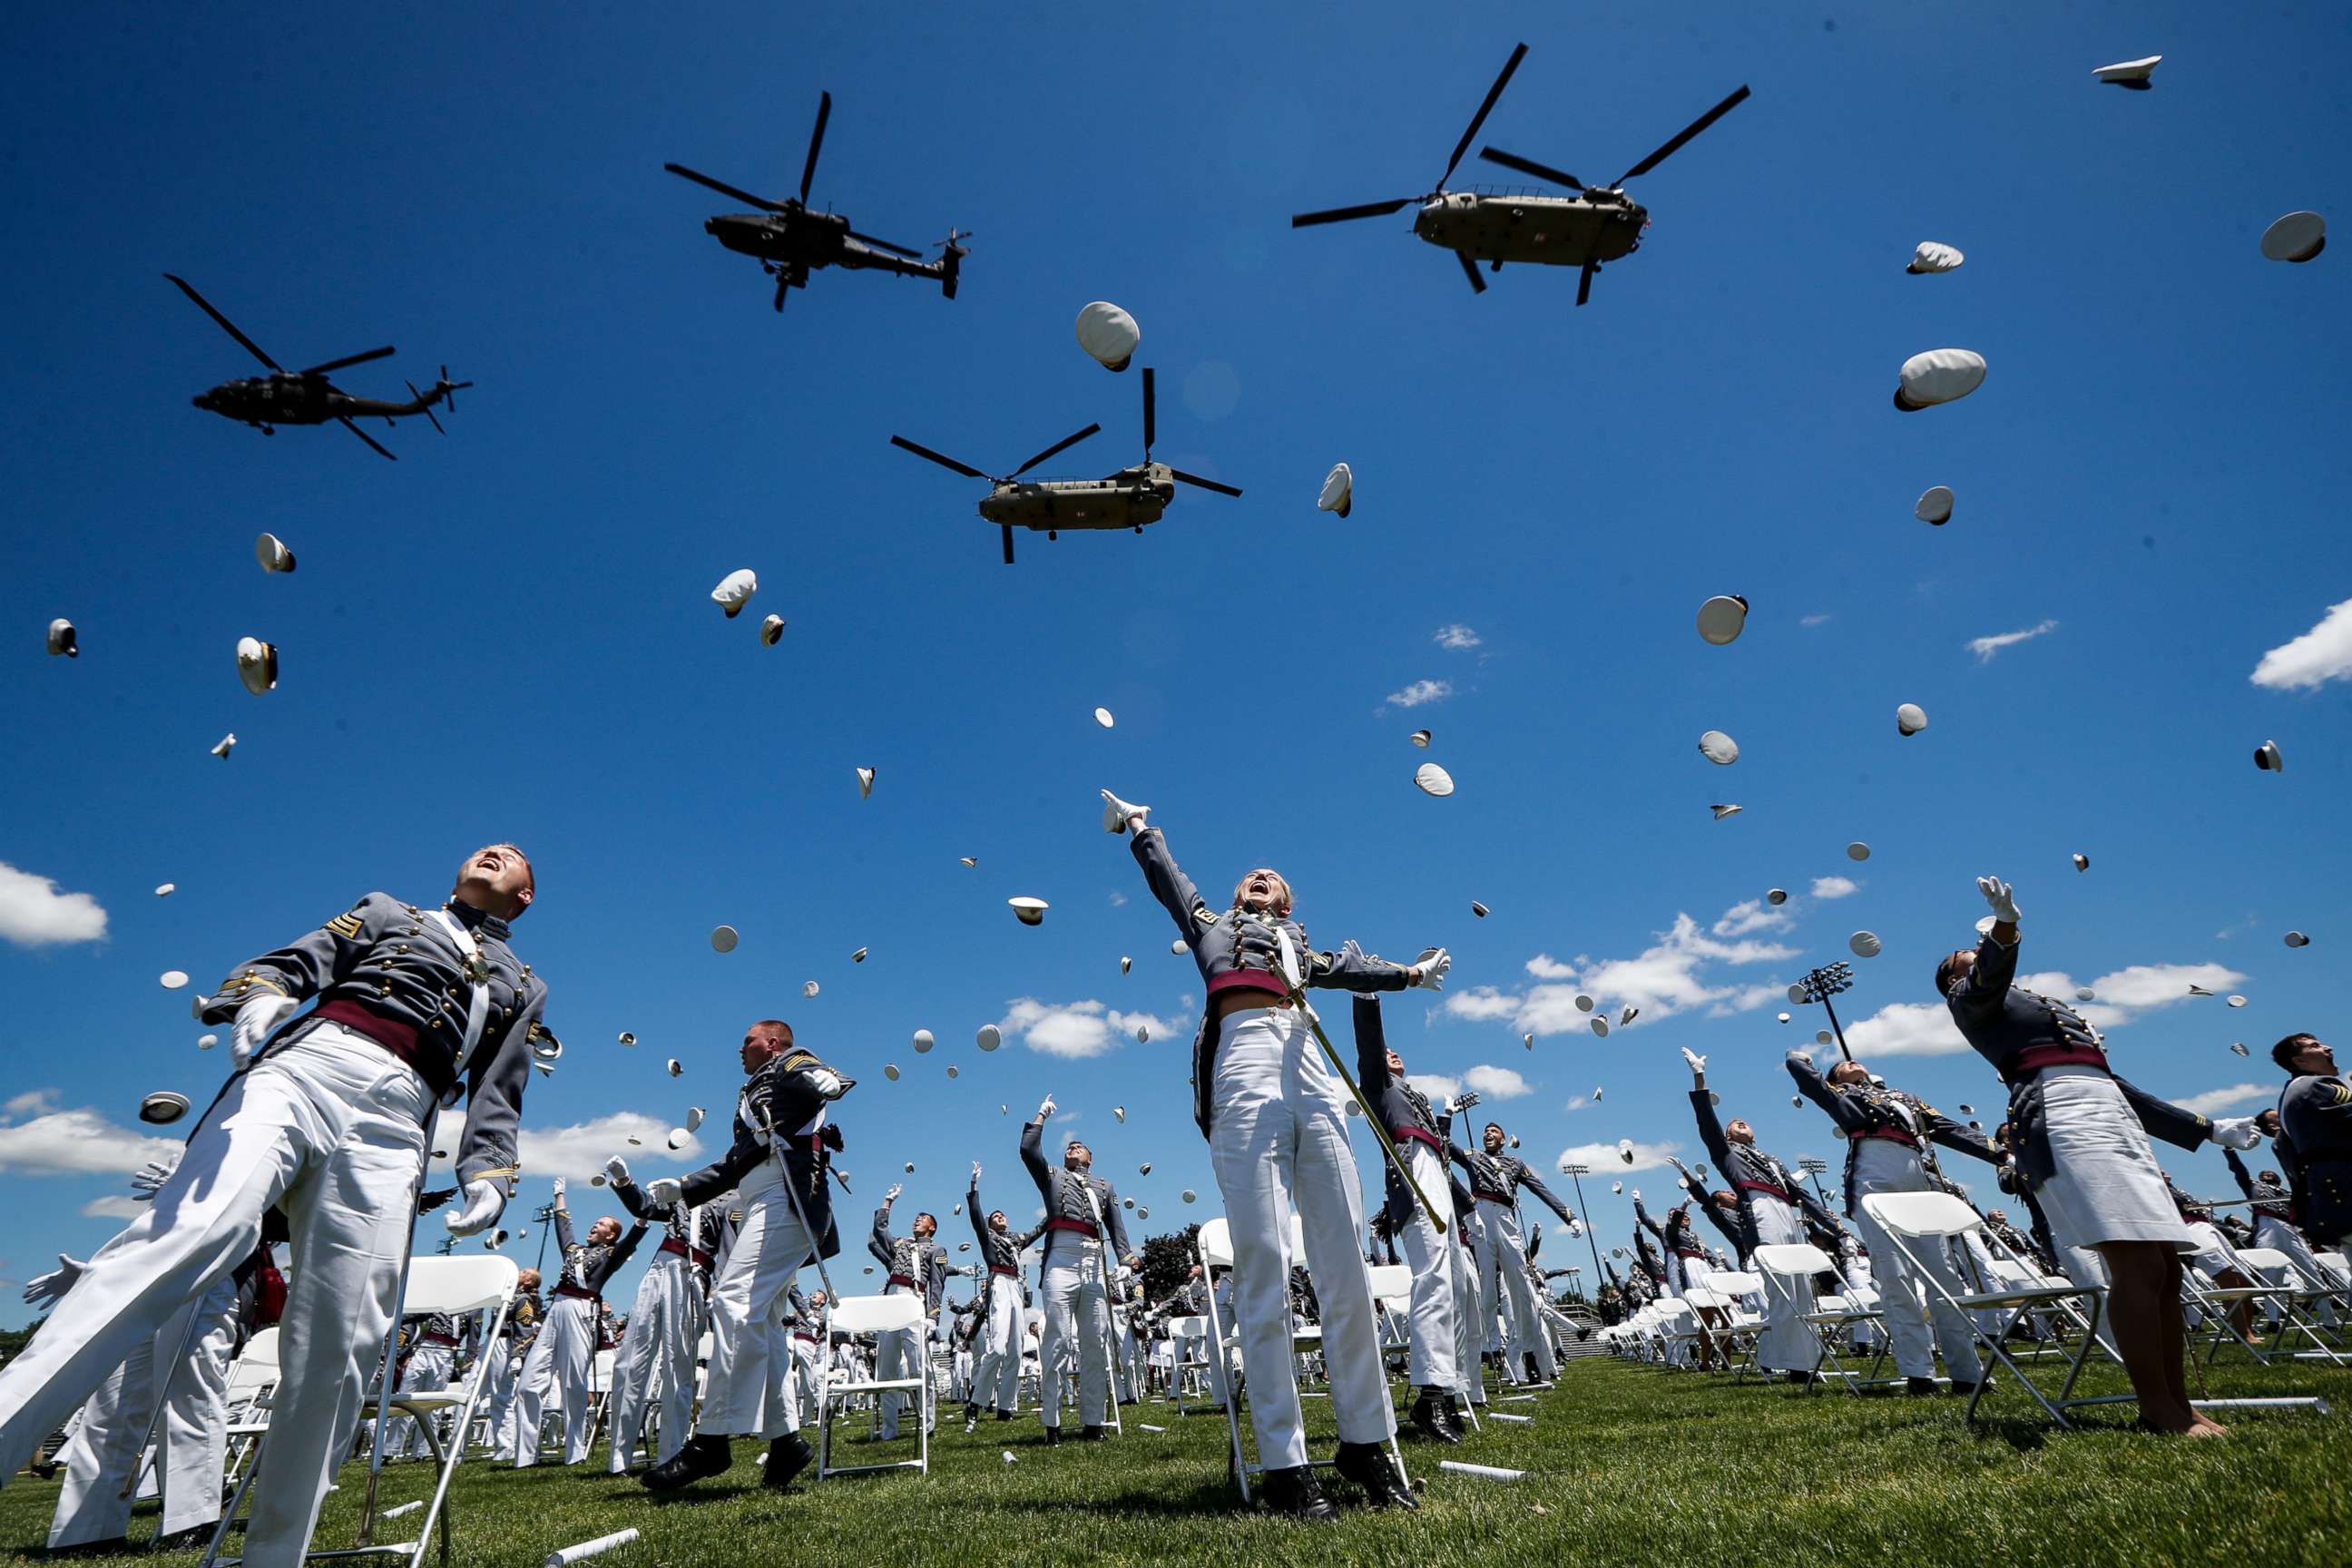 PHOTO: United States Military Academy graduating cadets celebrate at the end of their commencement ceremonies, June 13, 2020, in West Point, N.Y.